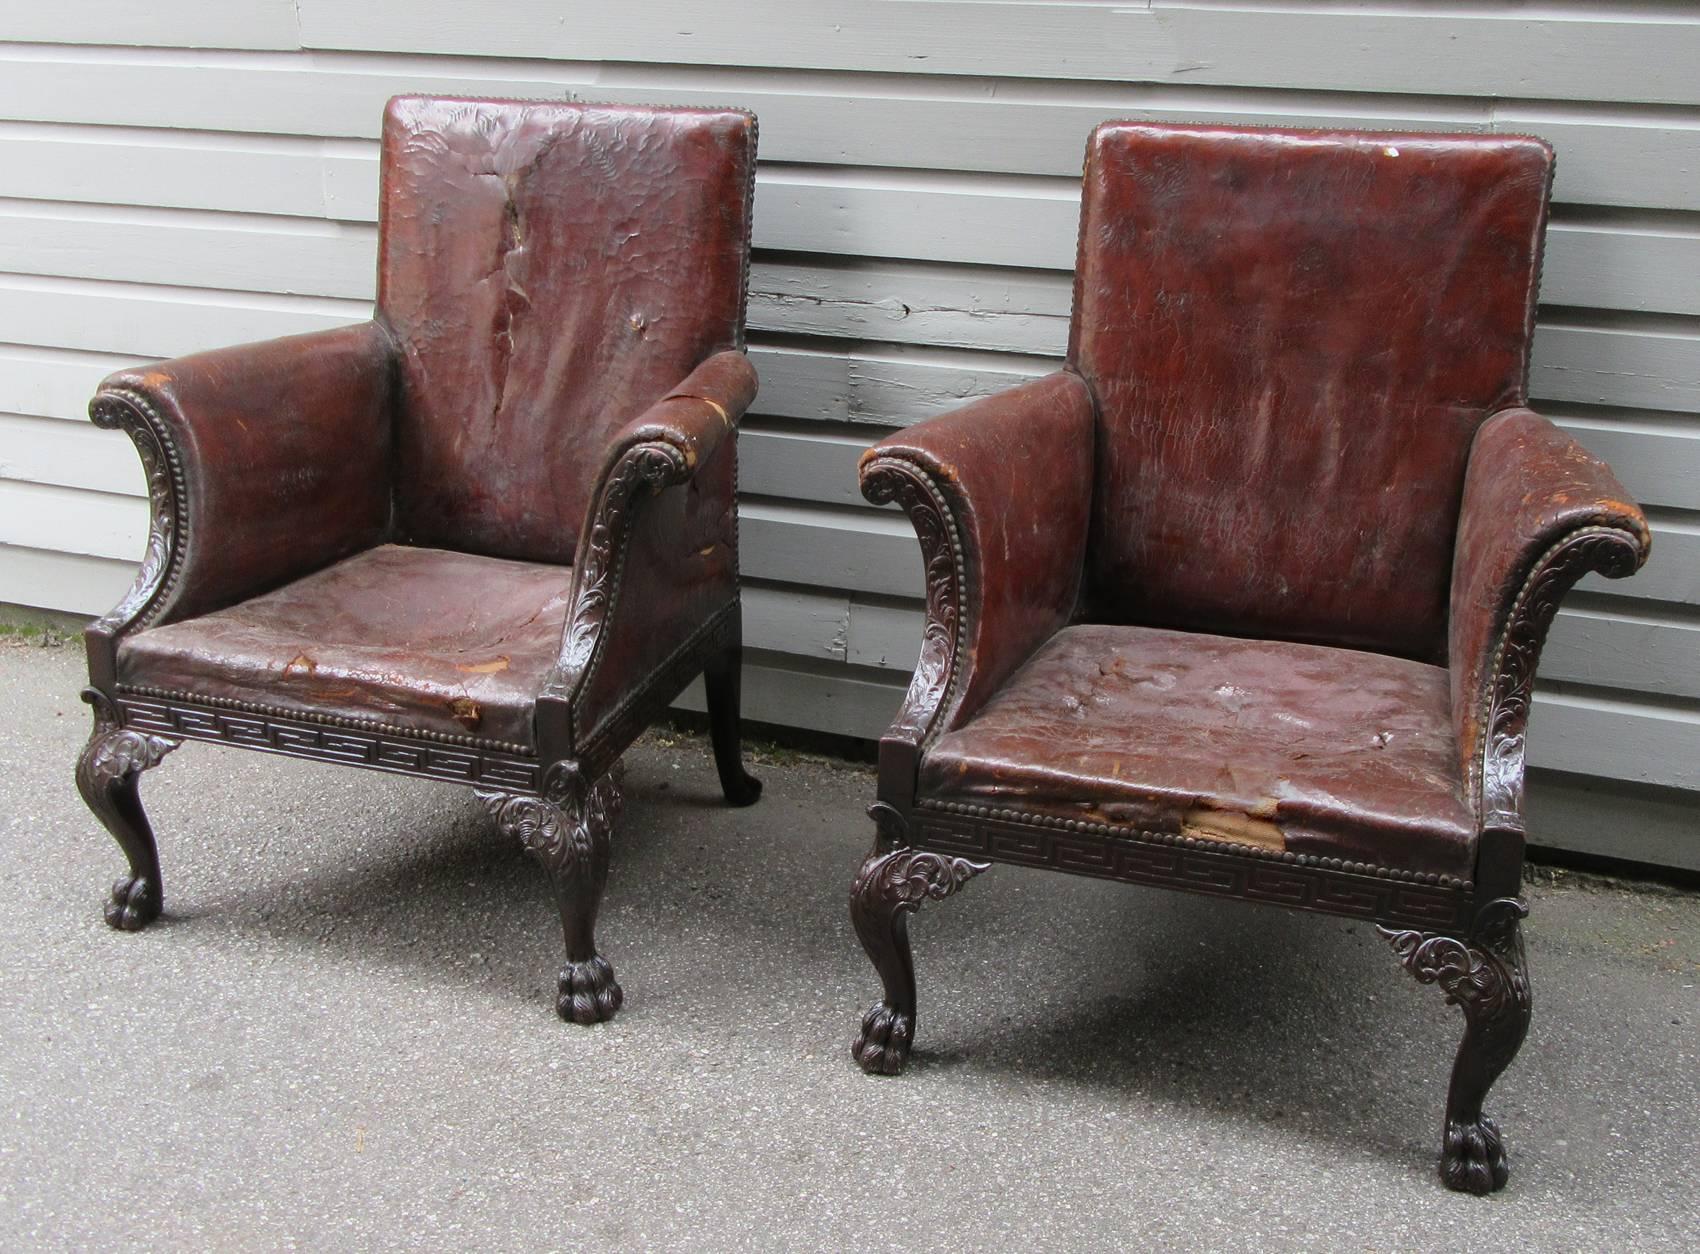 Carved Large Pair of Early 19th Century Irish Chippendale Mahogany Library Chairs